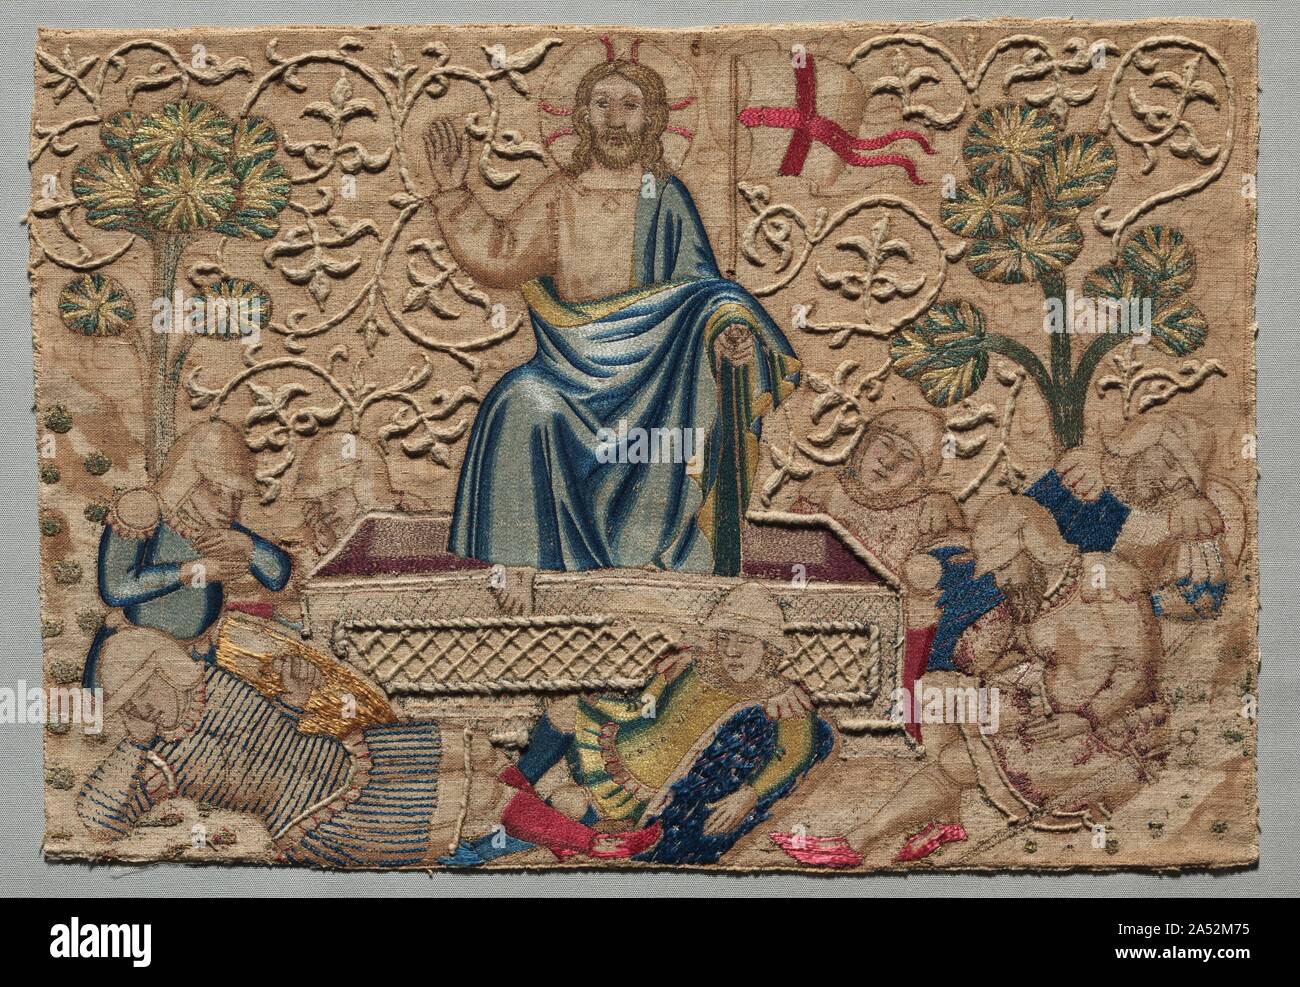 The Resurrection, from an Embroidered Altar Frontal: , 1375-1400. This scene of the Resurrection, along with 11 additional embroideries of the life of Christ, must have formed a spectacular altar frontal when the original expensive gold thread covered the background. Removed and probably melted down for its monetary value, gold thread covered the padded vines, which resembled raised plaster decoration, or gesso, used in paintings. The loss exposes a rarely seen preparatory drawing in sepia ink and wash by an unidentified painter. In addition to bits of gold thread, what does survive is of the Stock Photo